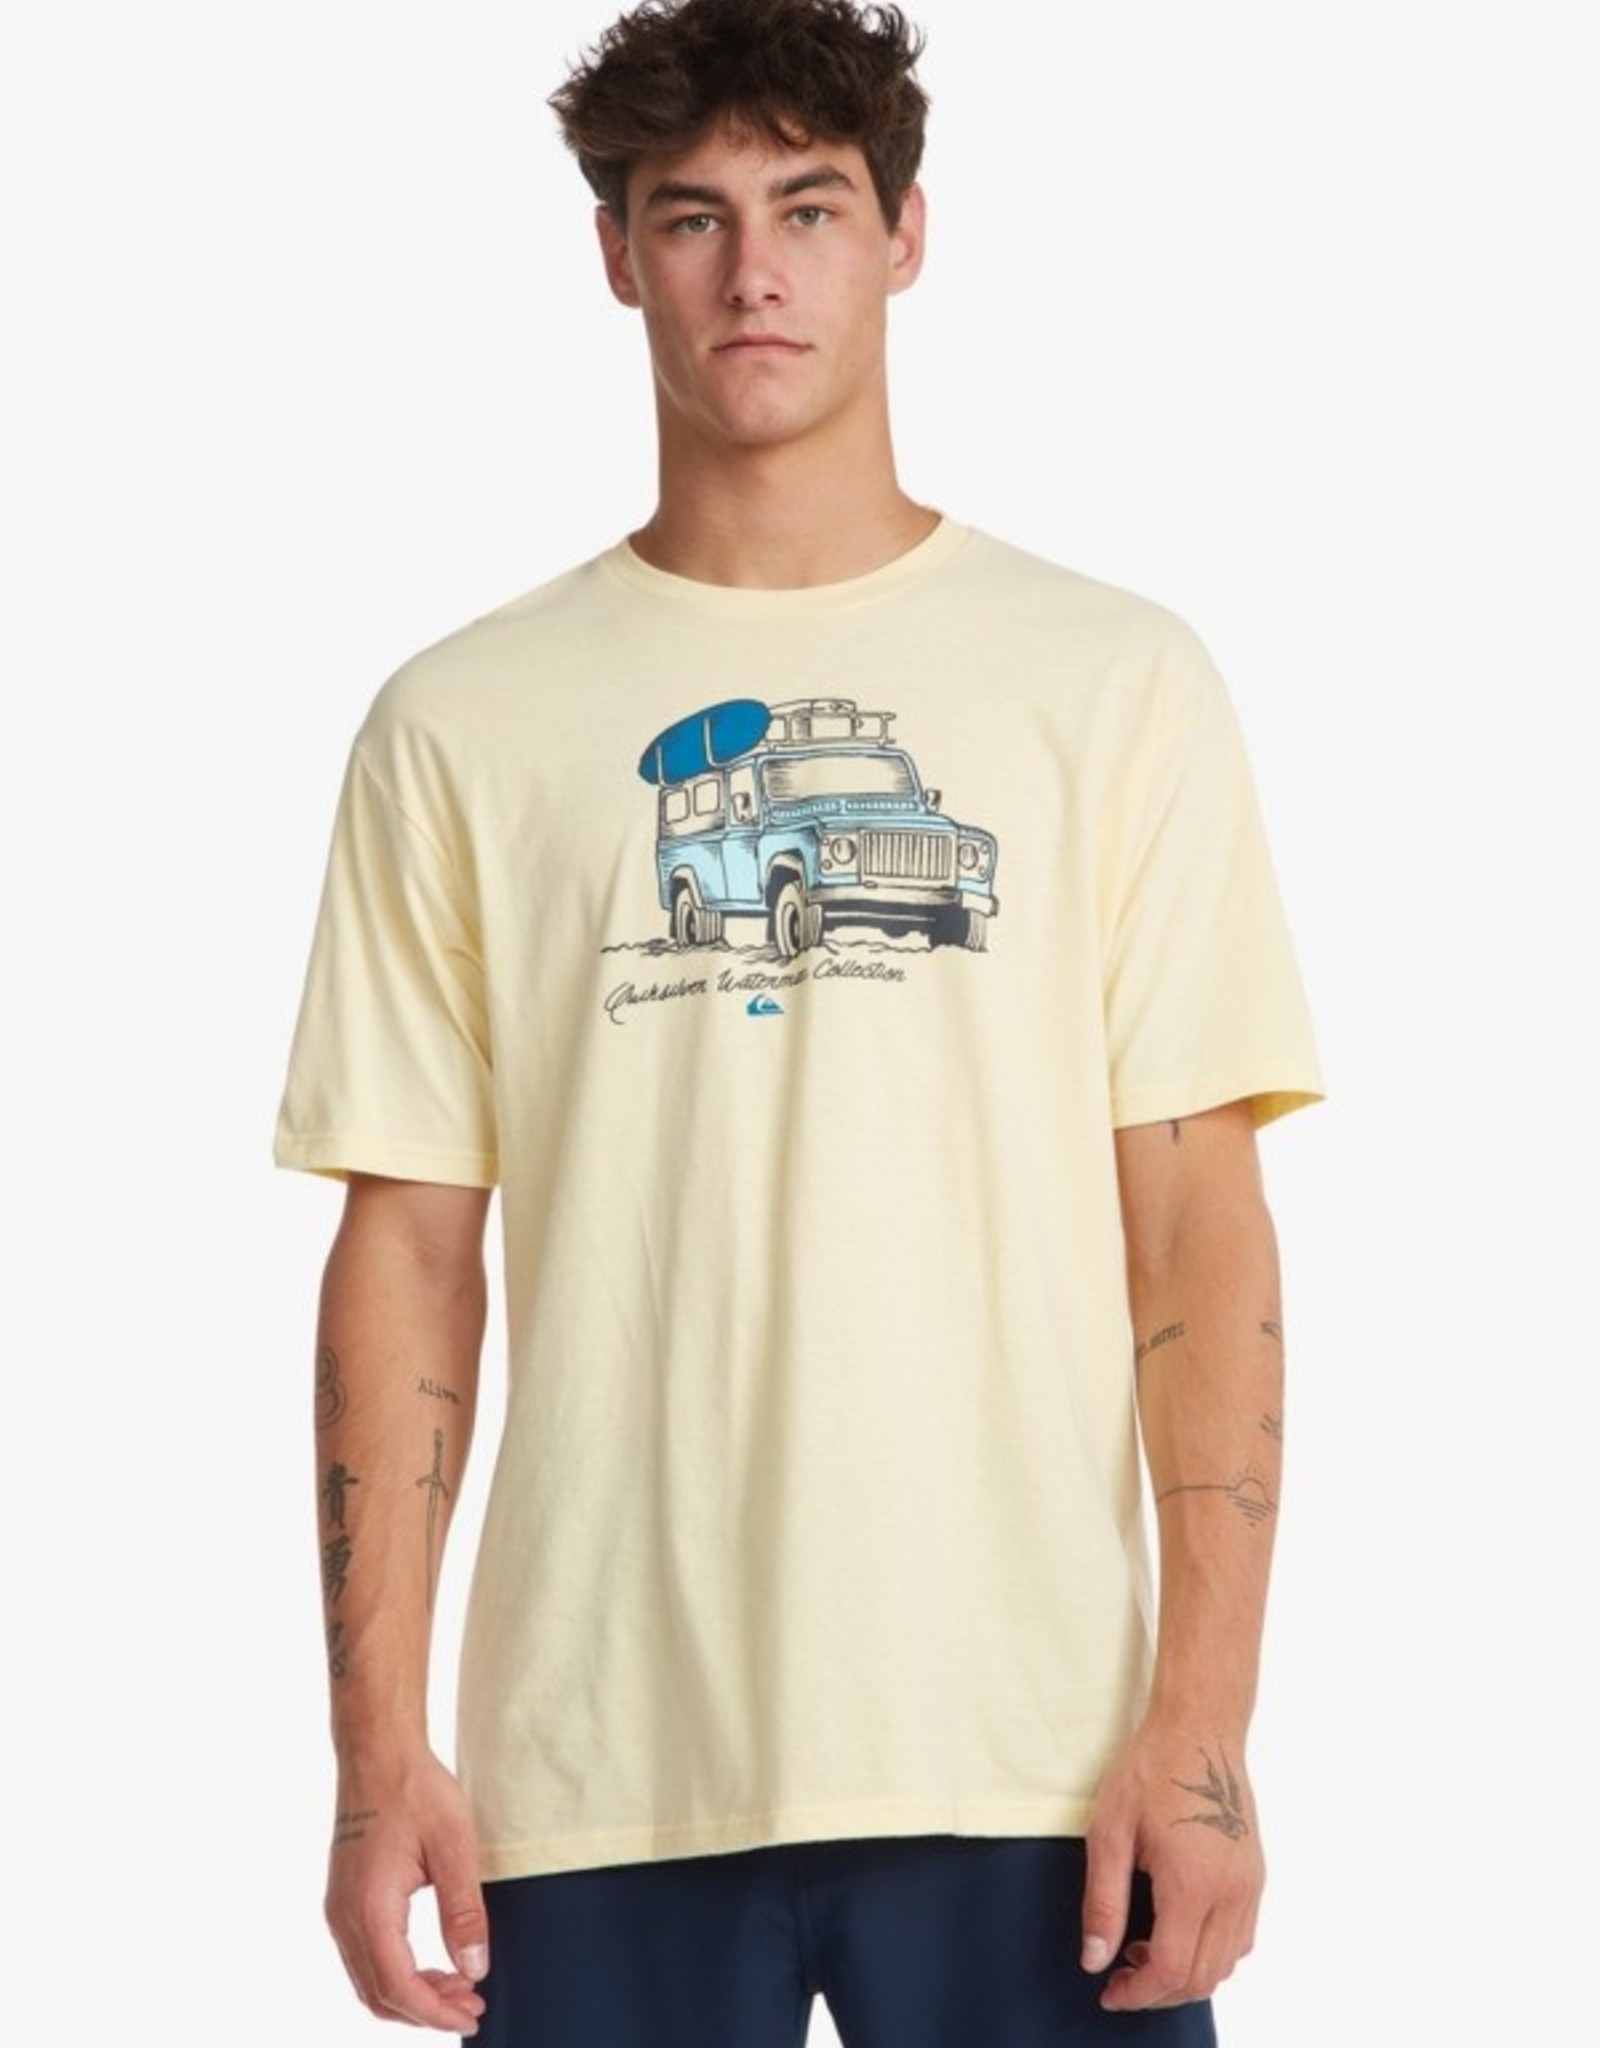 Quiksilver Private Road Tee